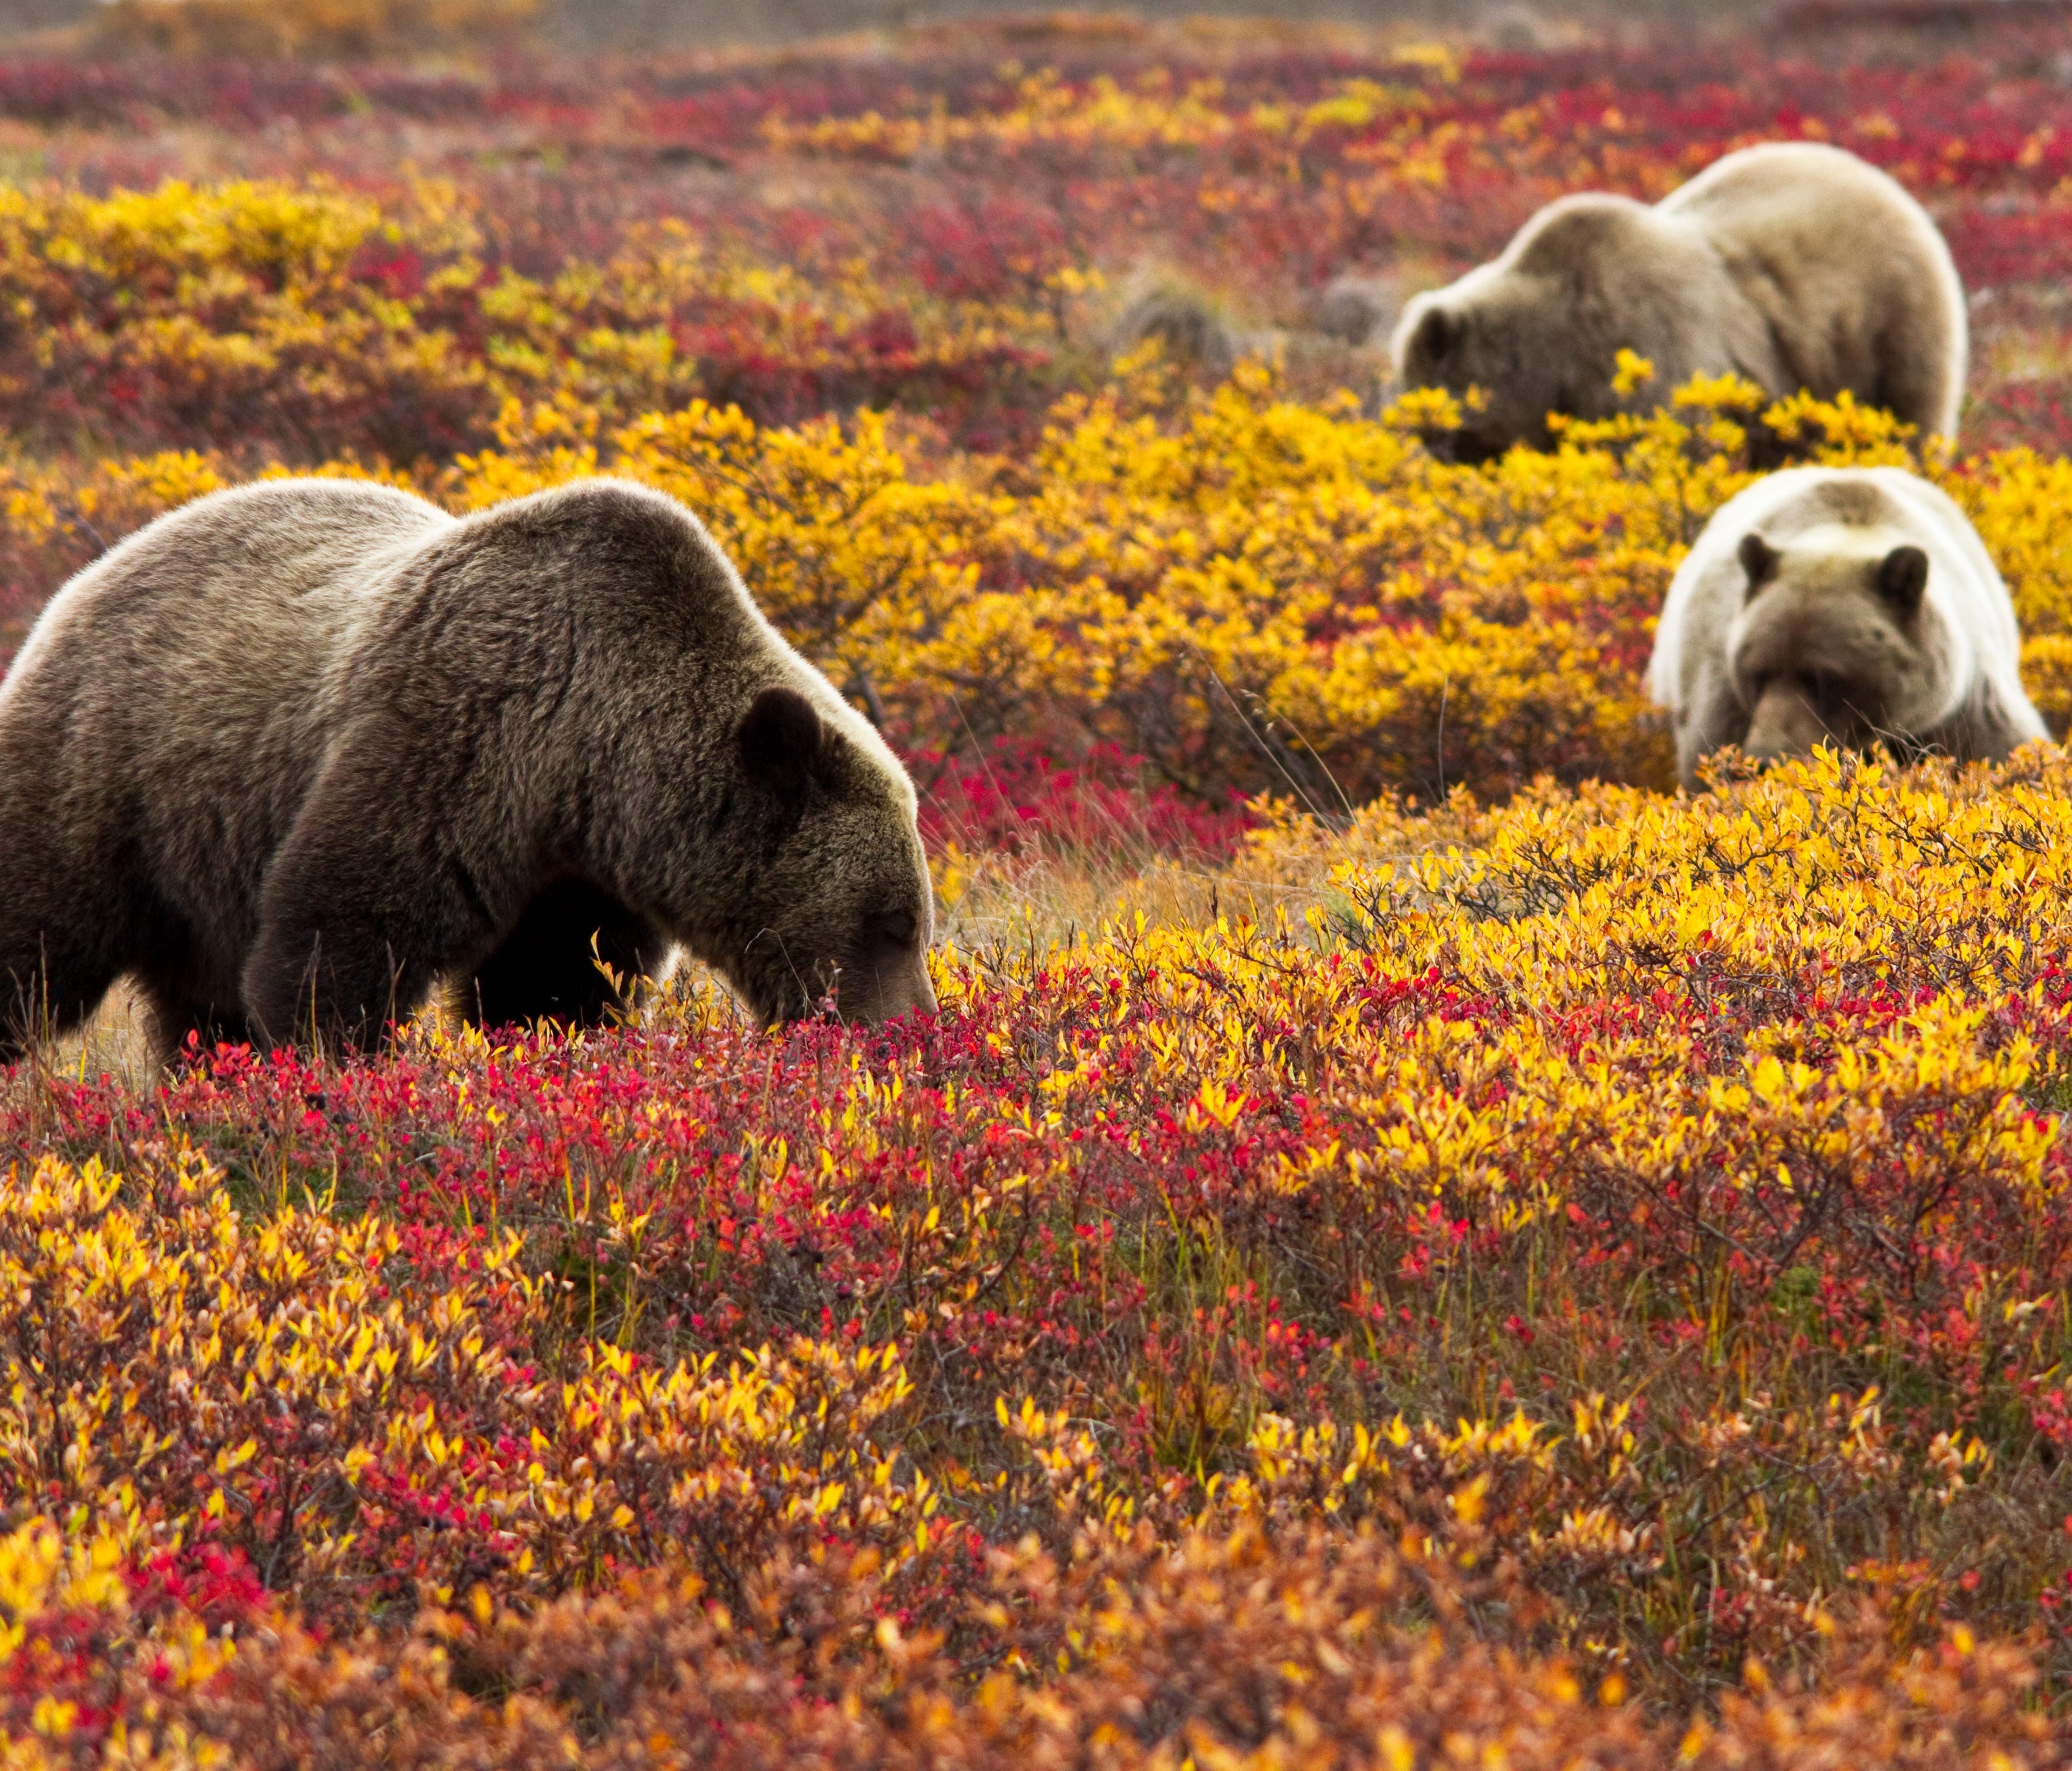 Fall at Denali National Park and Preserve means gorgeous autumn colors and hungry brown bears. To get ready their long winter sleep, bears spend the summer and fall packing on the pounds -- gorging themselves on salmon, berries and grass. Sleeping sn